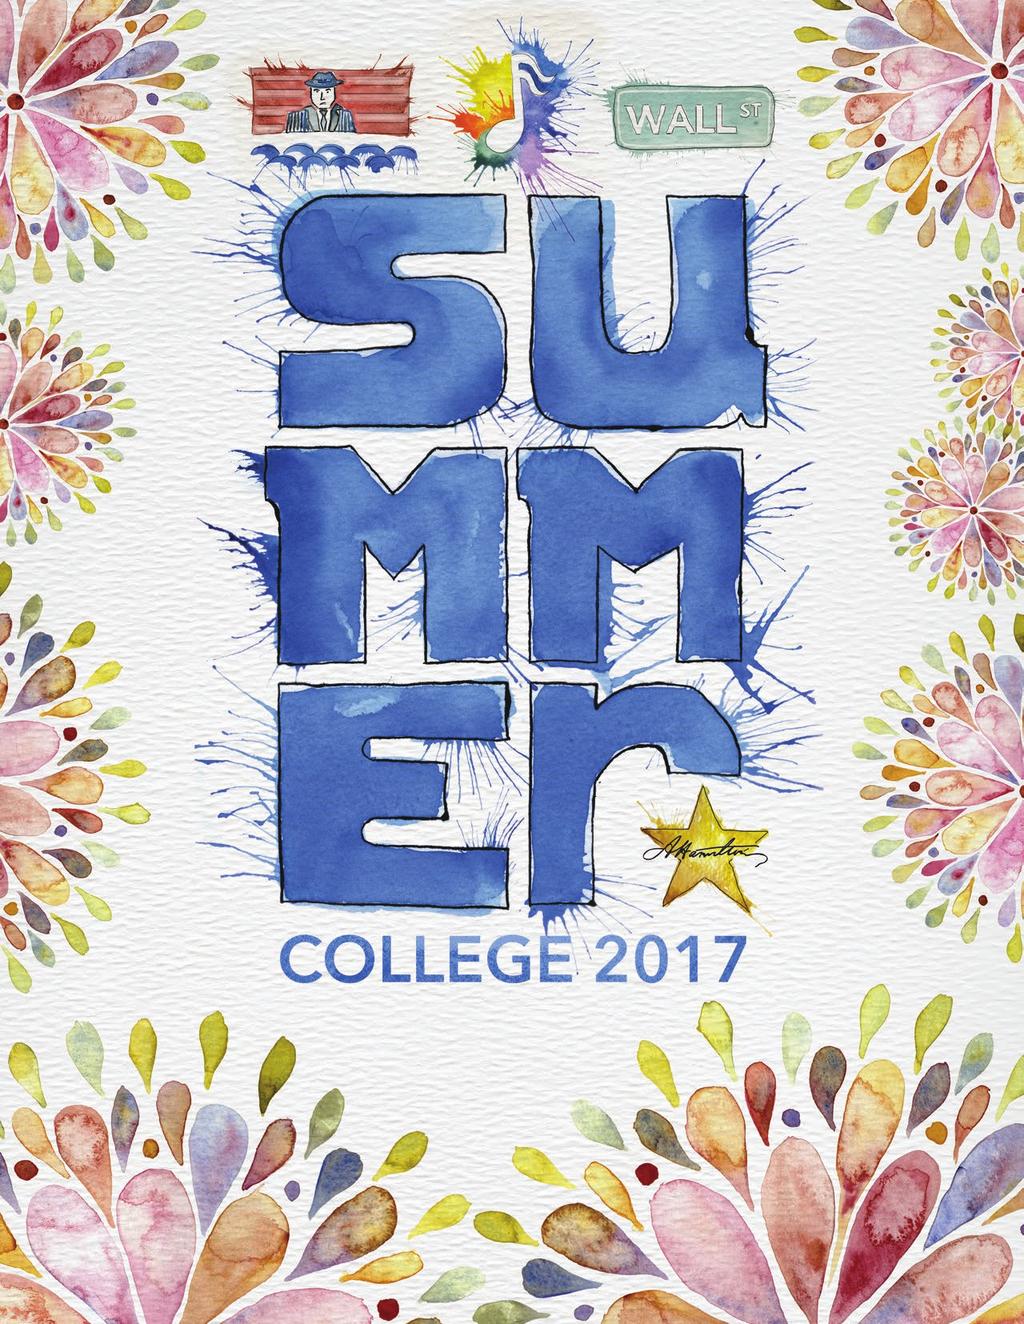 Residential Pre-College Programs for High School Students ONE-WEEK SUMMER COLLEGE SESSION: JUNE